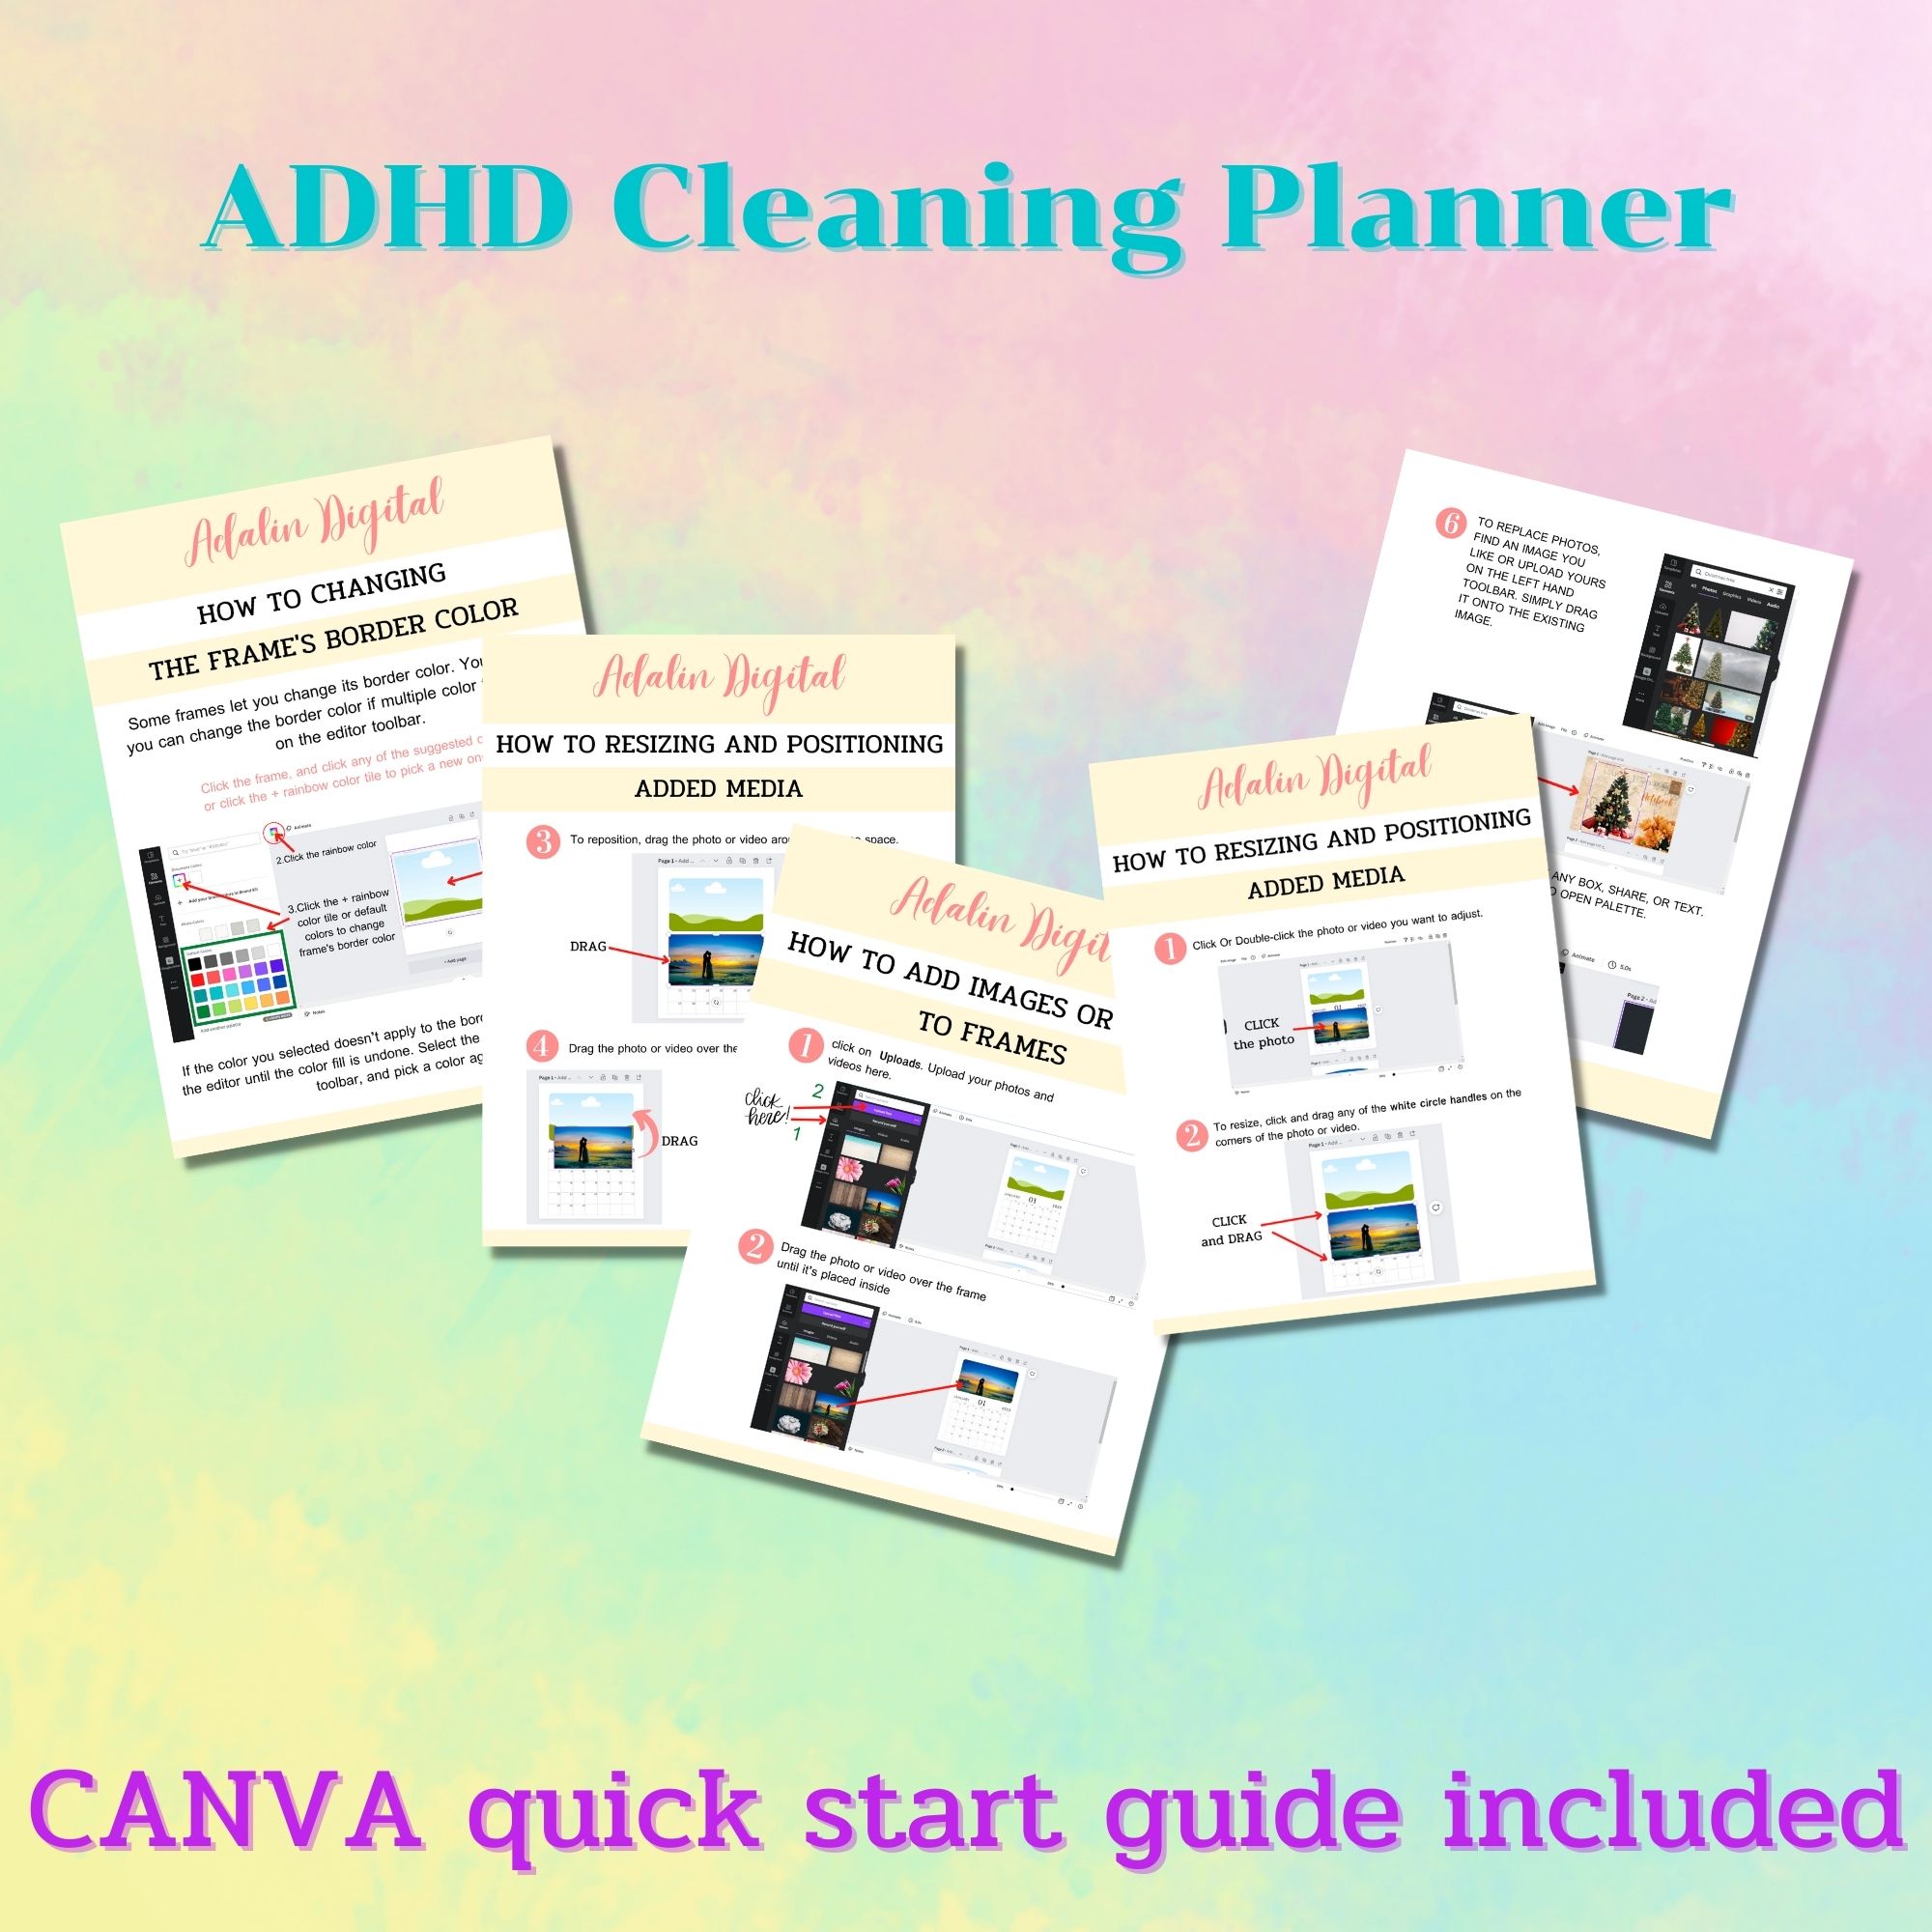 The adhd cleaning planner is shown here.